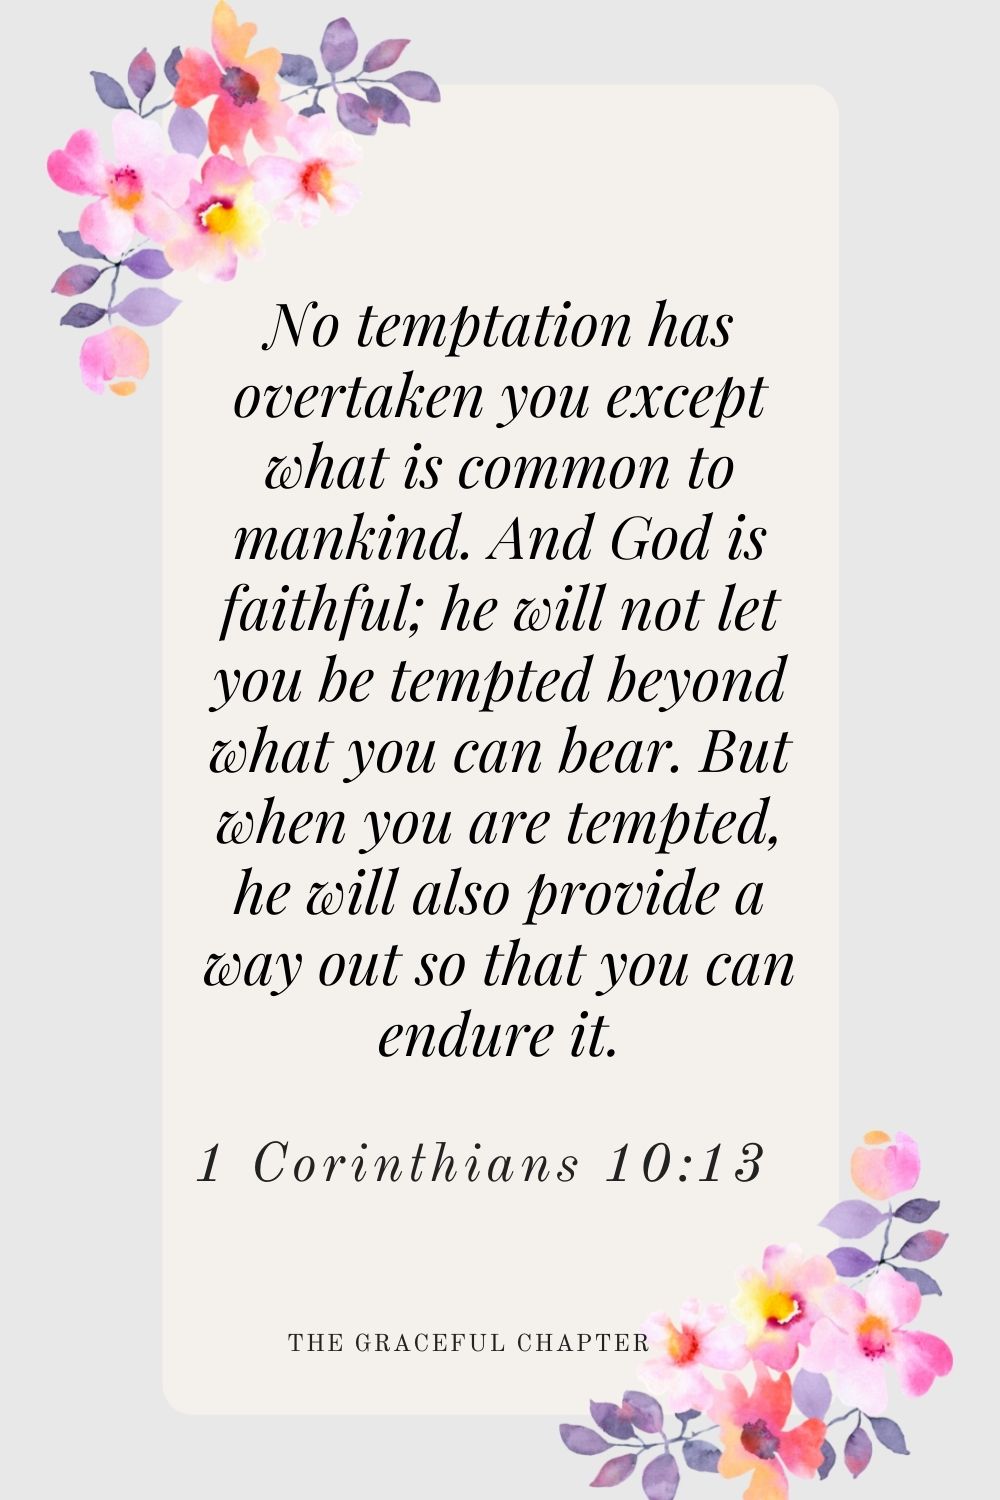 No temptation has overtaken you except what is common to mankind. And God is faithful; he will not let you be tempted beyond what you can bear. But when you are tempted, he will also provide a way out so that you can endure it. 1 Corinthians 10:13